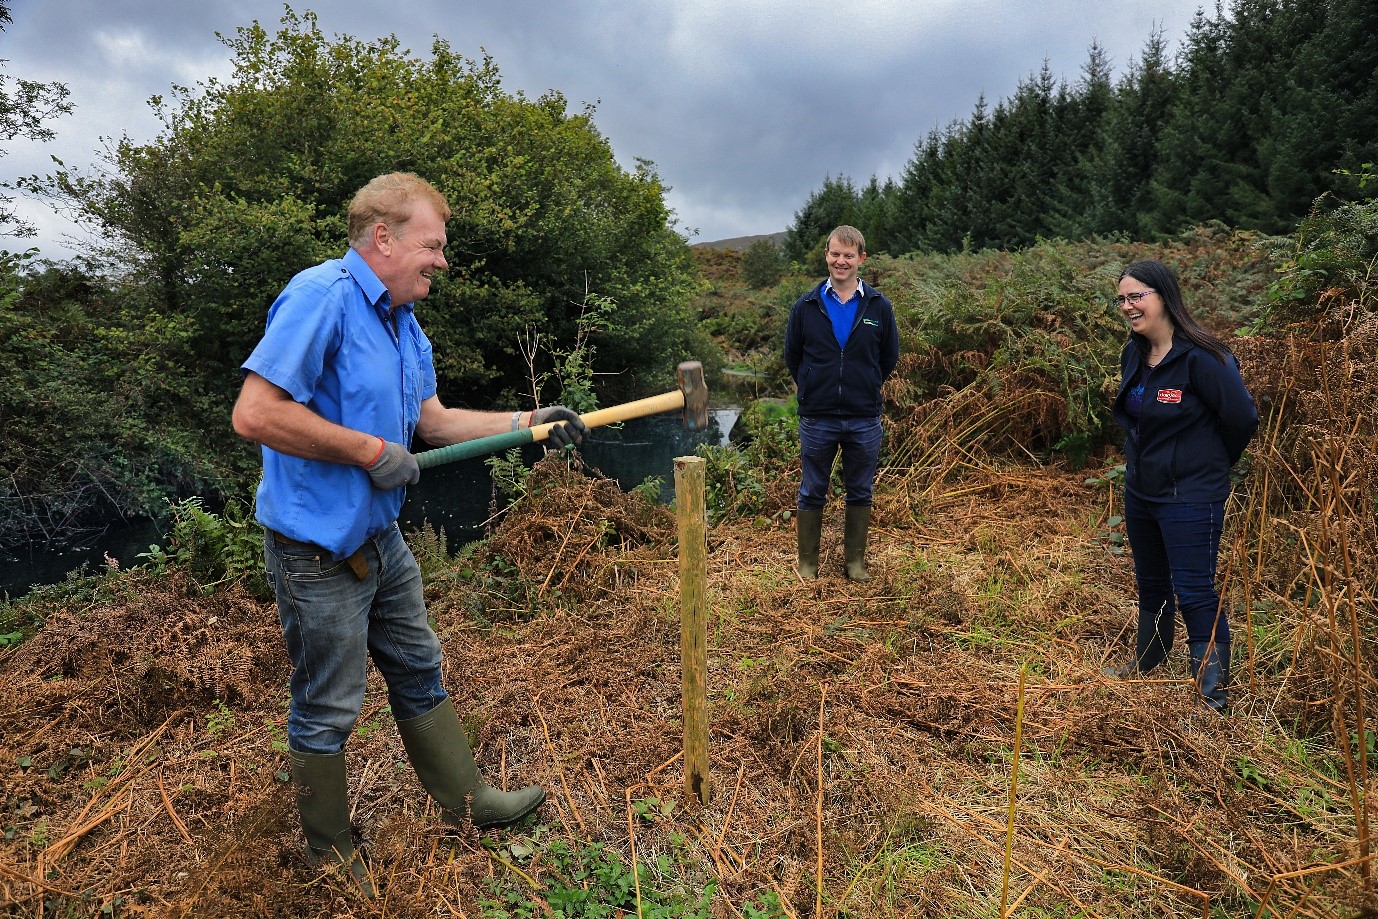 A farmer in the Caha catchment is fencing off his river, with the help of two Teagasc advisors who are looking on.